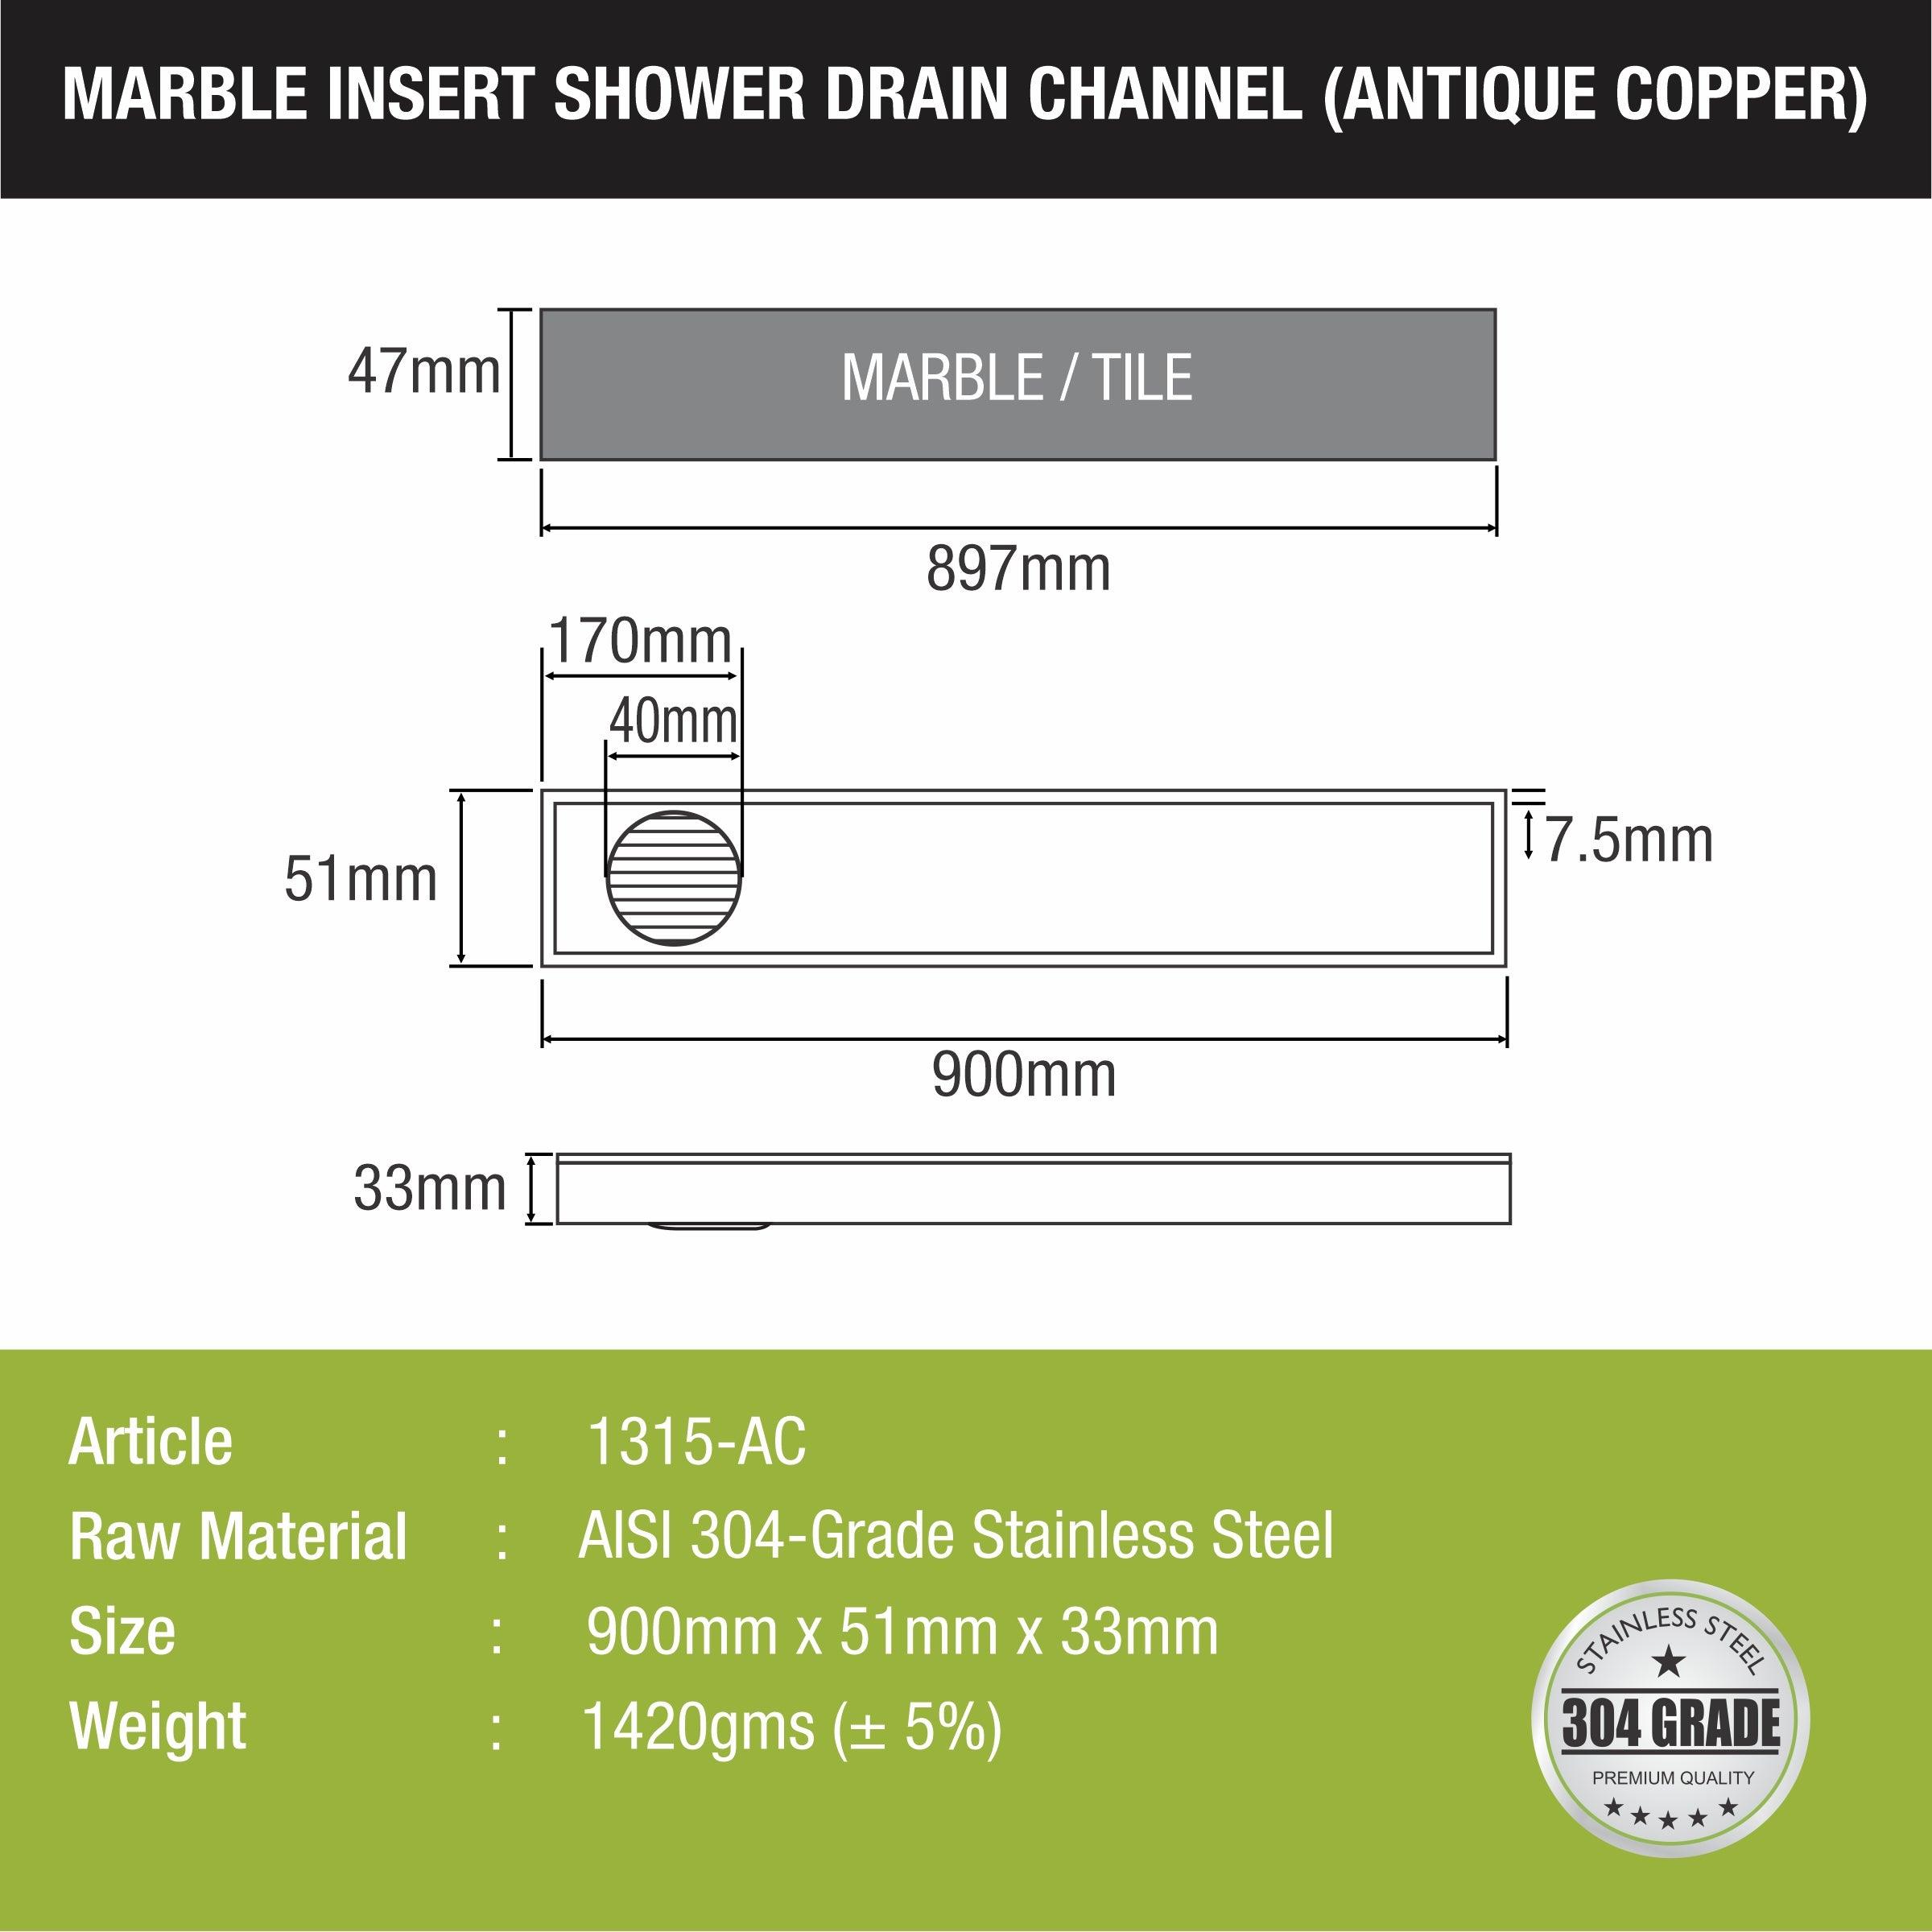 Marble Insert Shower Drain Channel - Antique Copper (36 x 2 Inches) sizes and dimensions